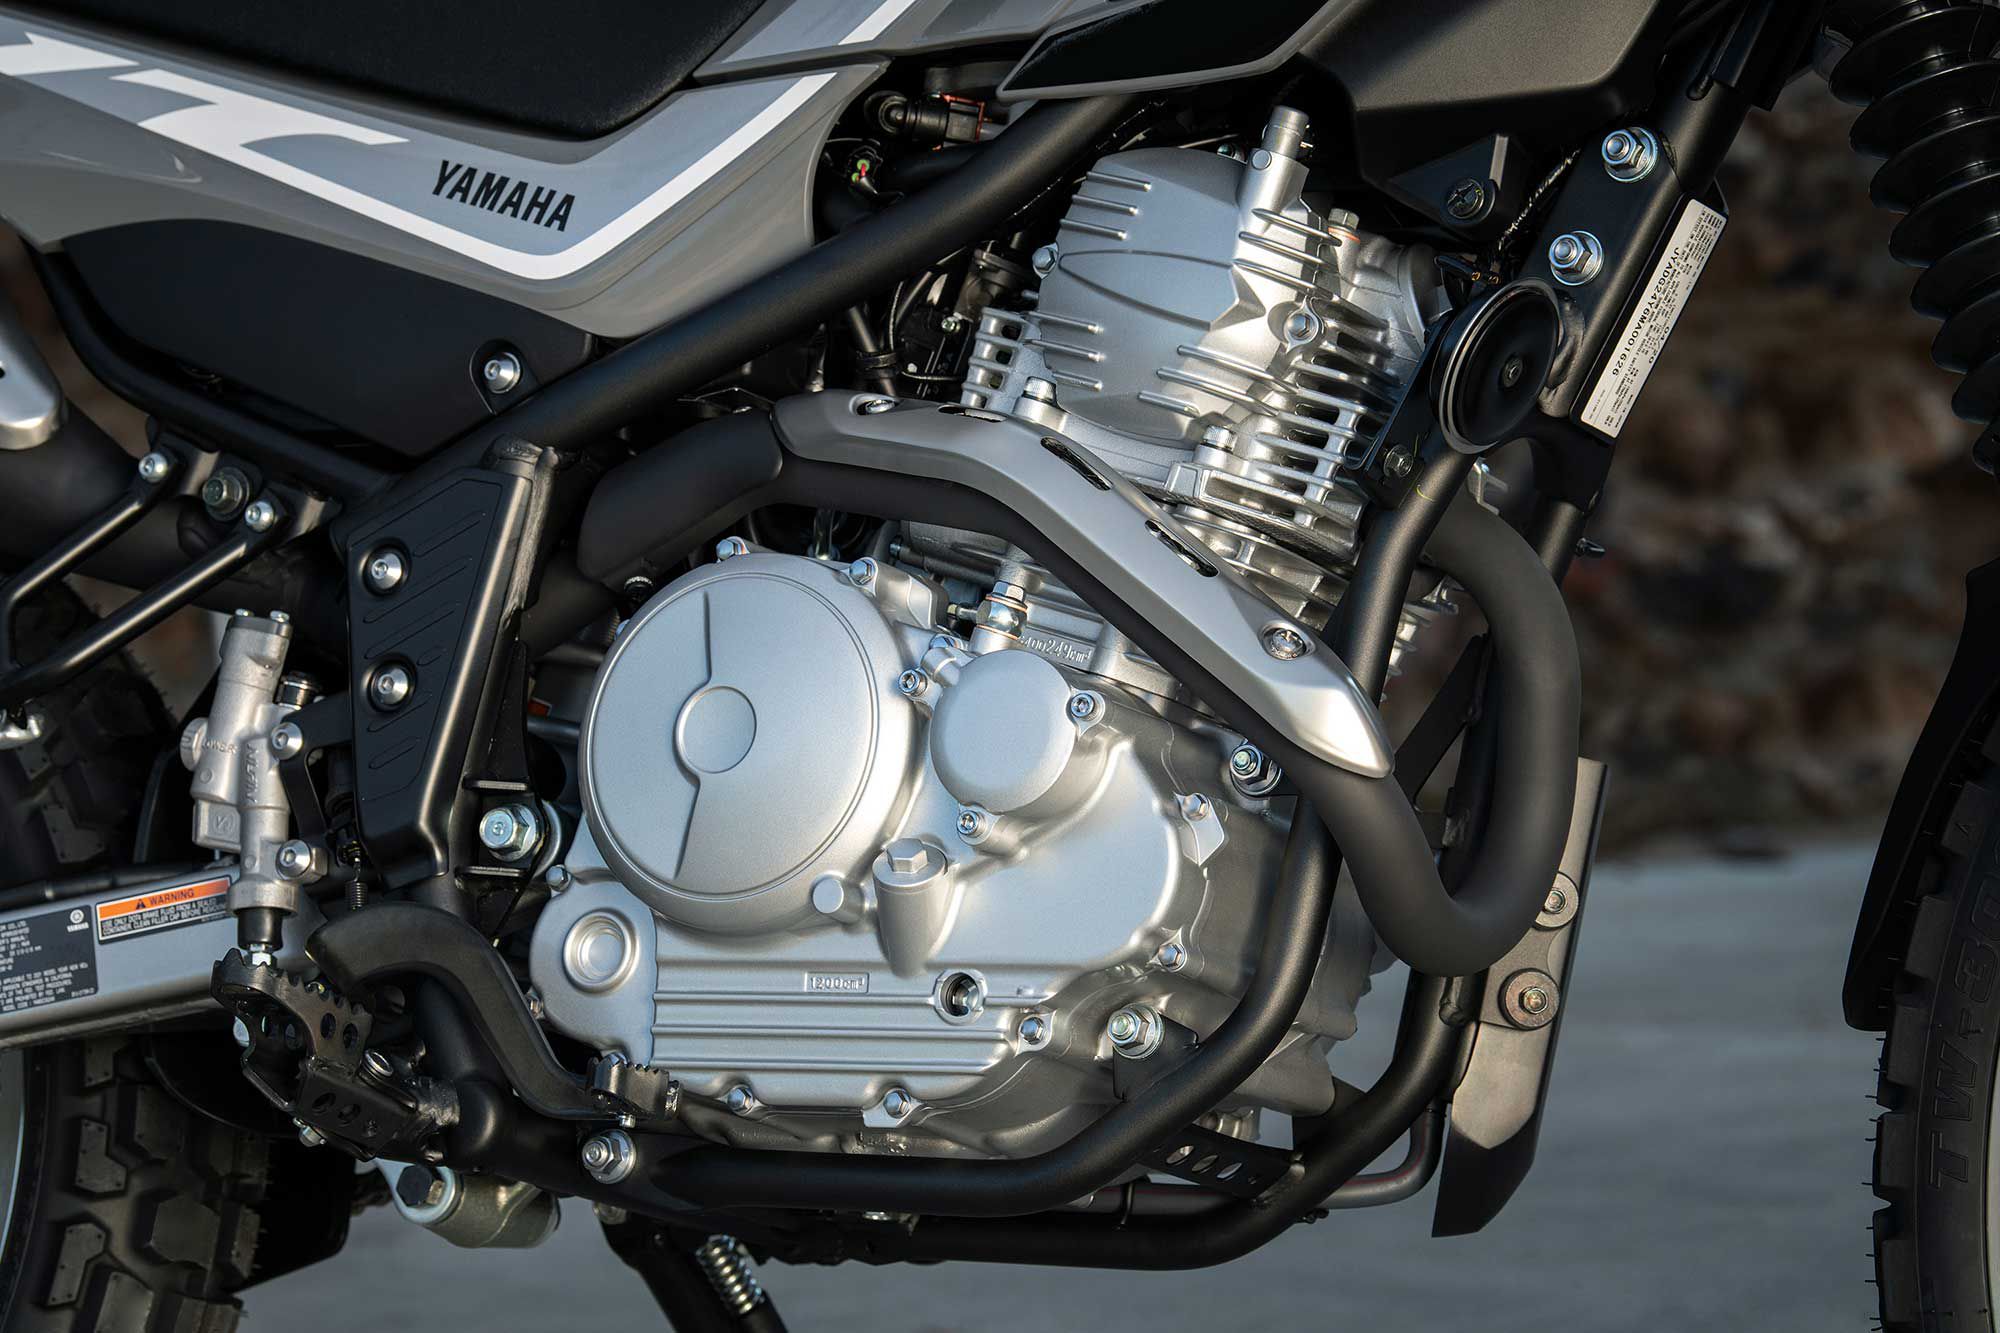 The XT250’s five-speed transmission works with a fuel-injected engine.